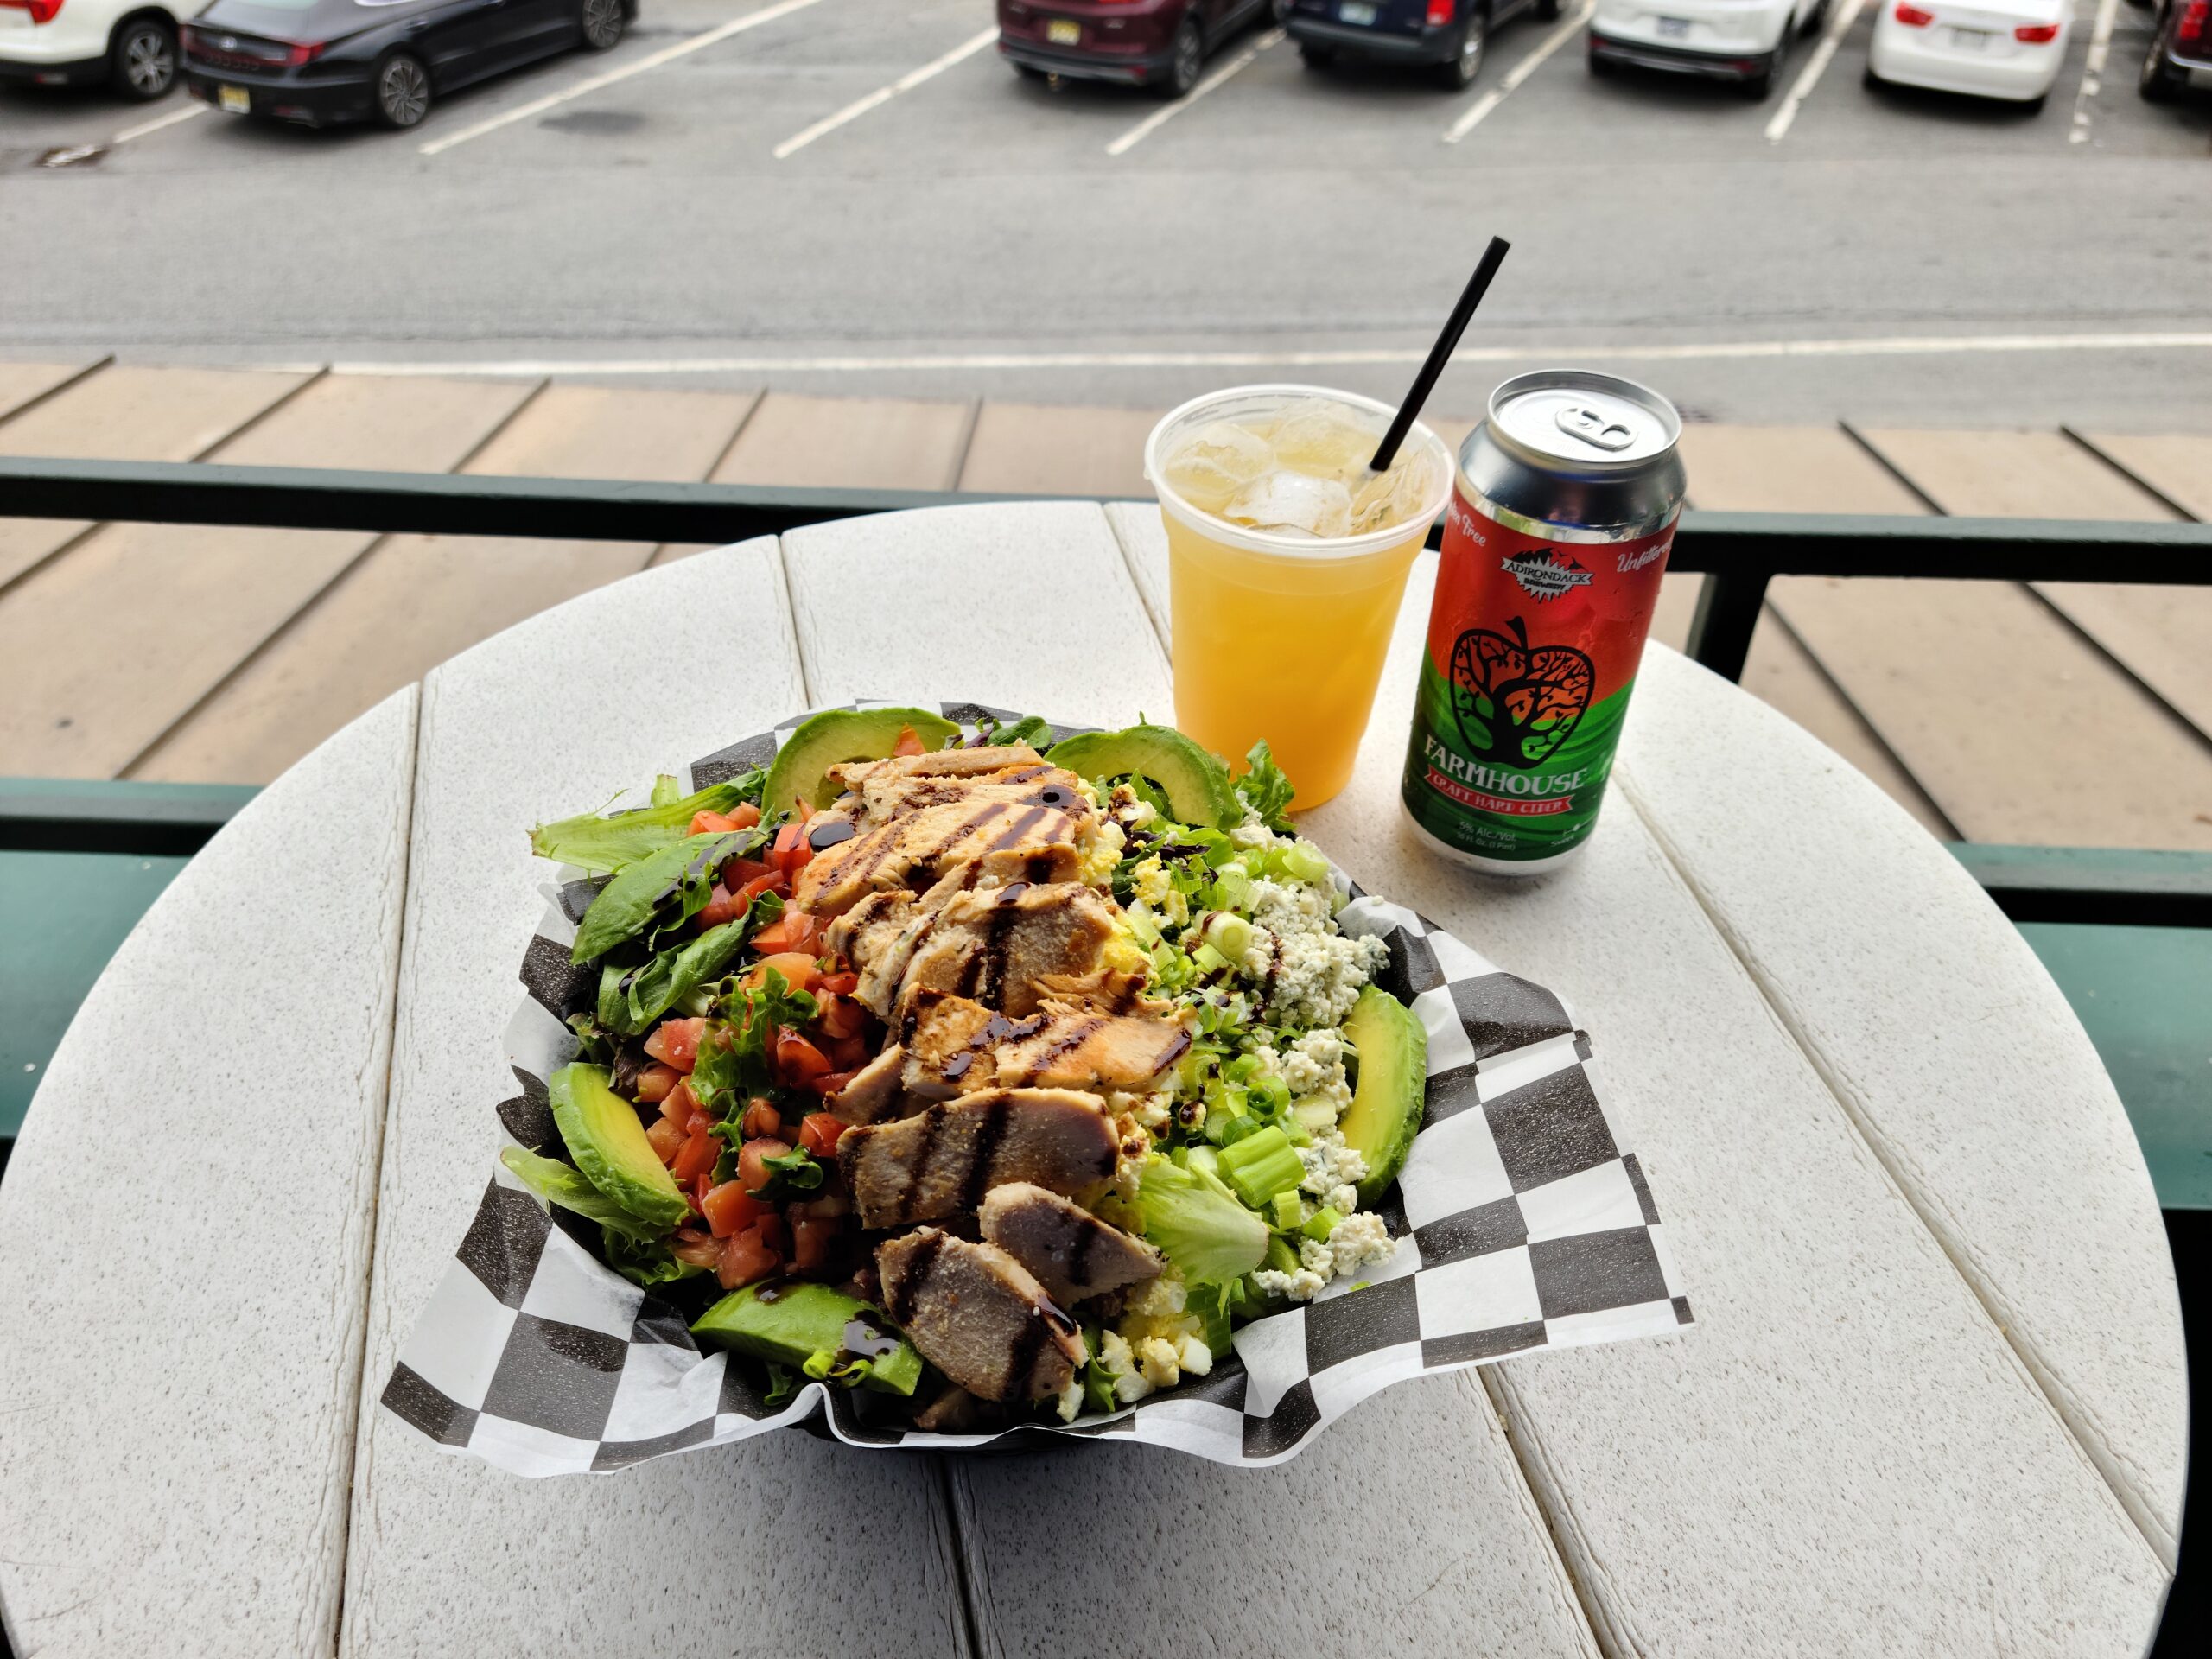 Grilled chicken salad with Farmhouse hard cider